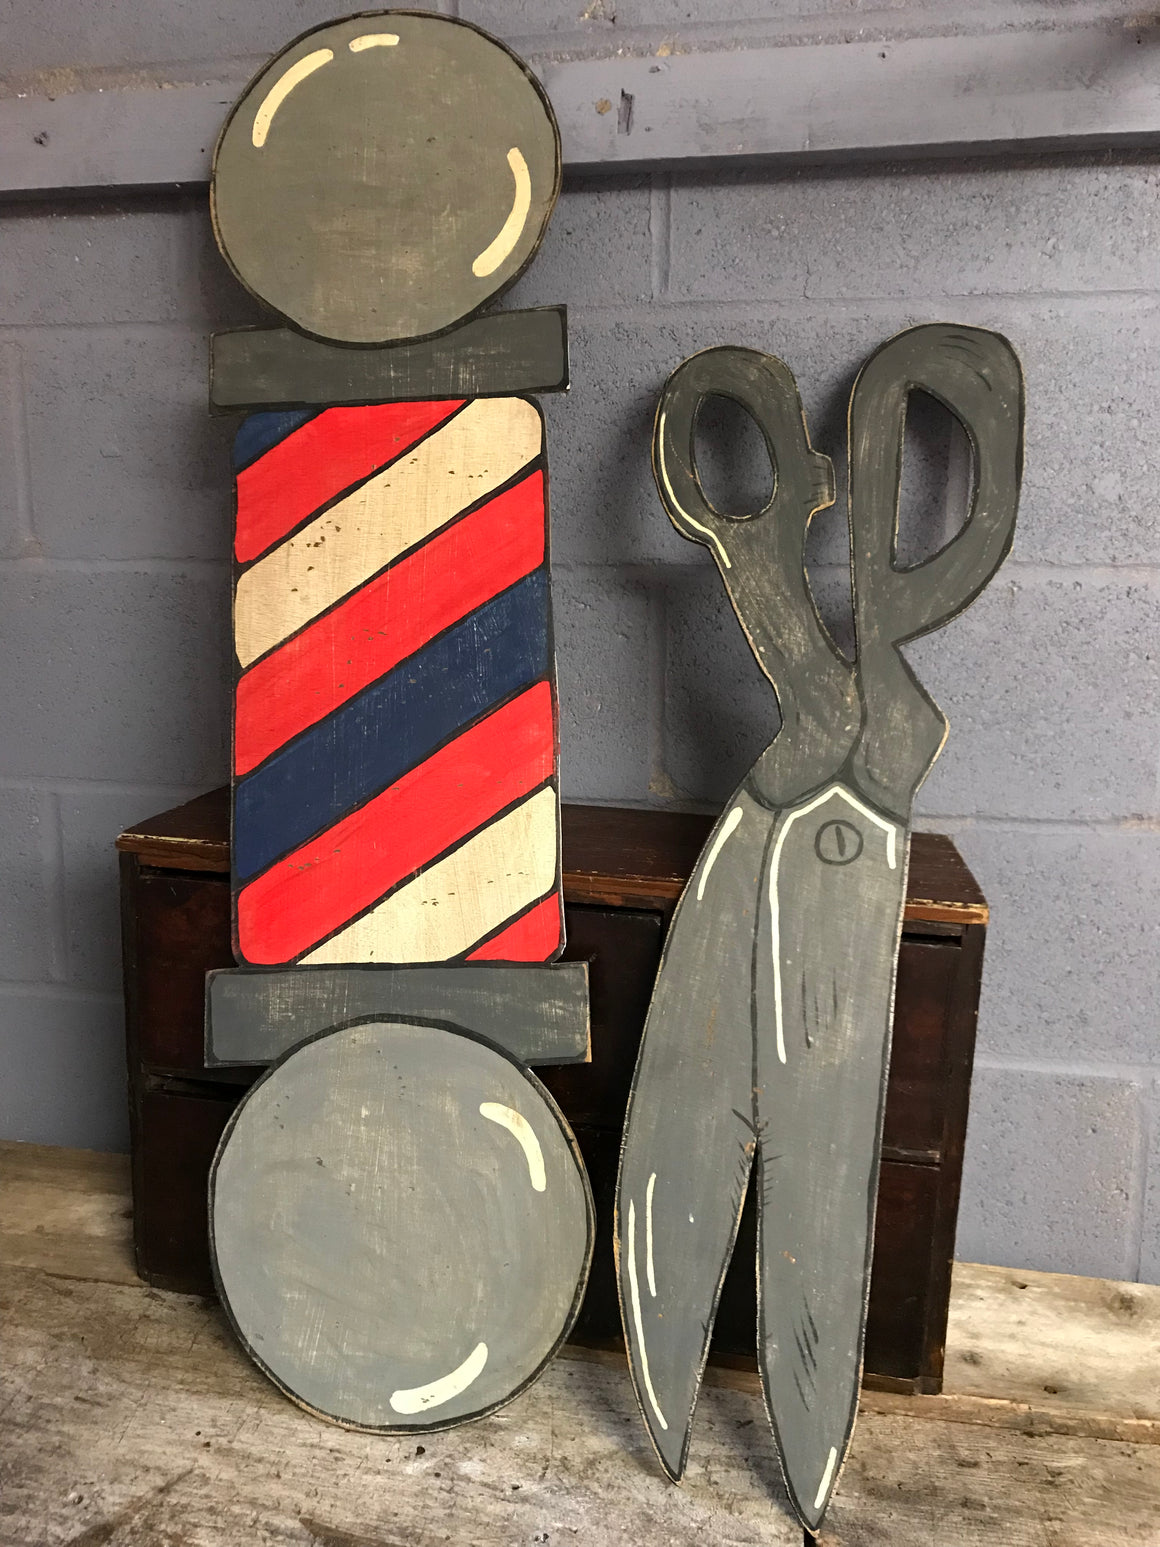 A hand painted barber's pole cut out advertising panel